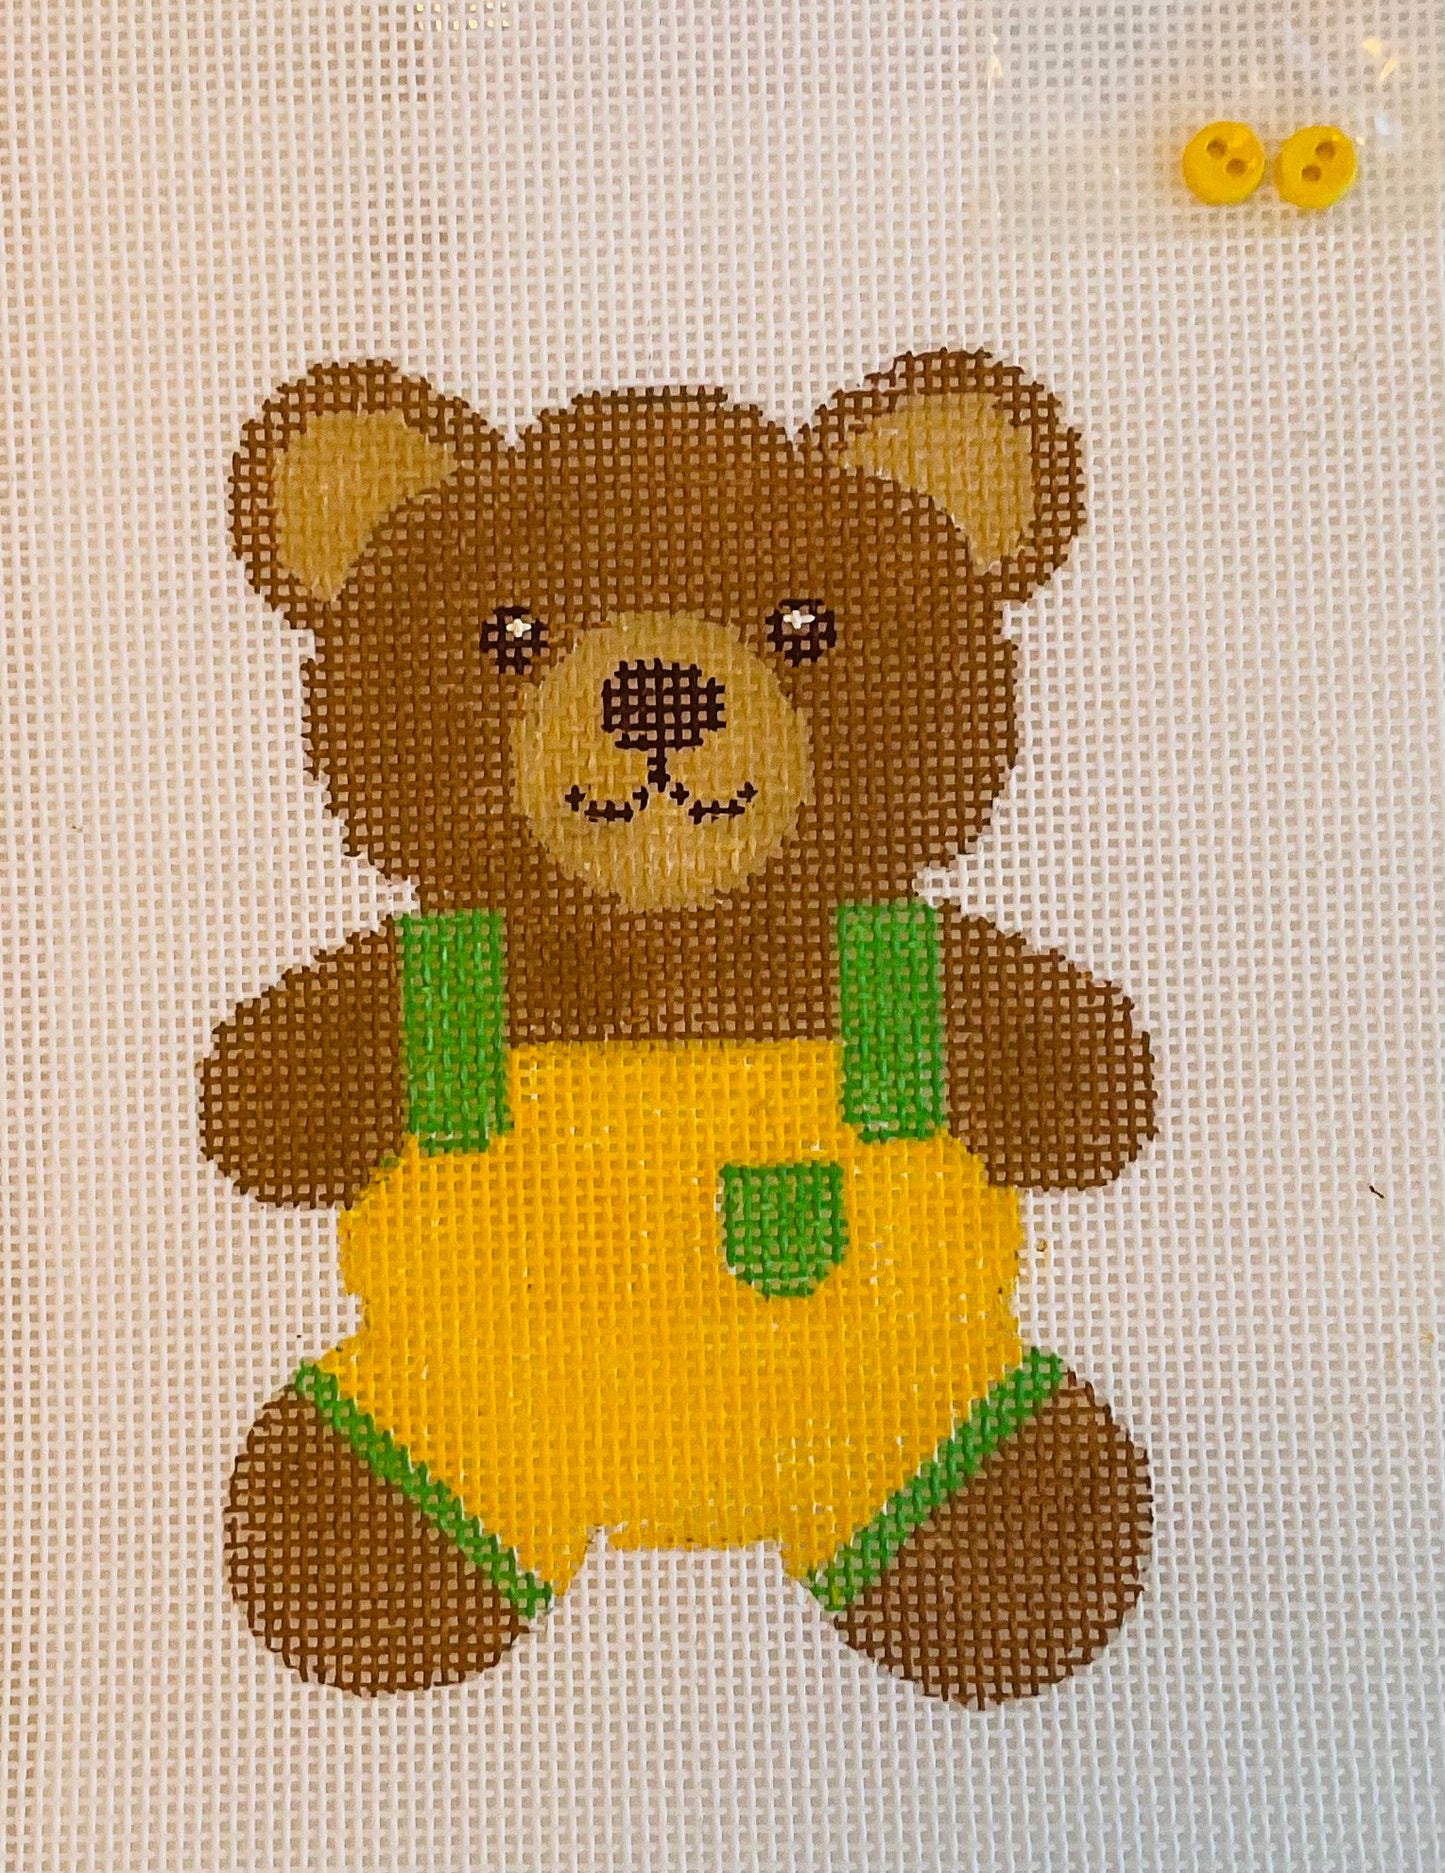 Teddy Bear Smiles Yellow with Stitch Guide